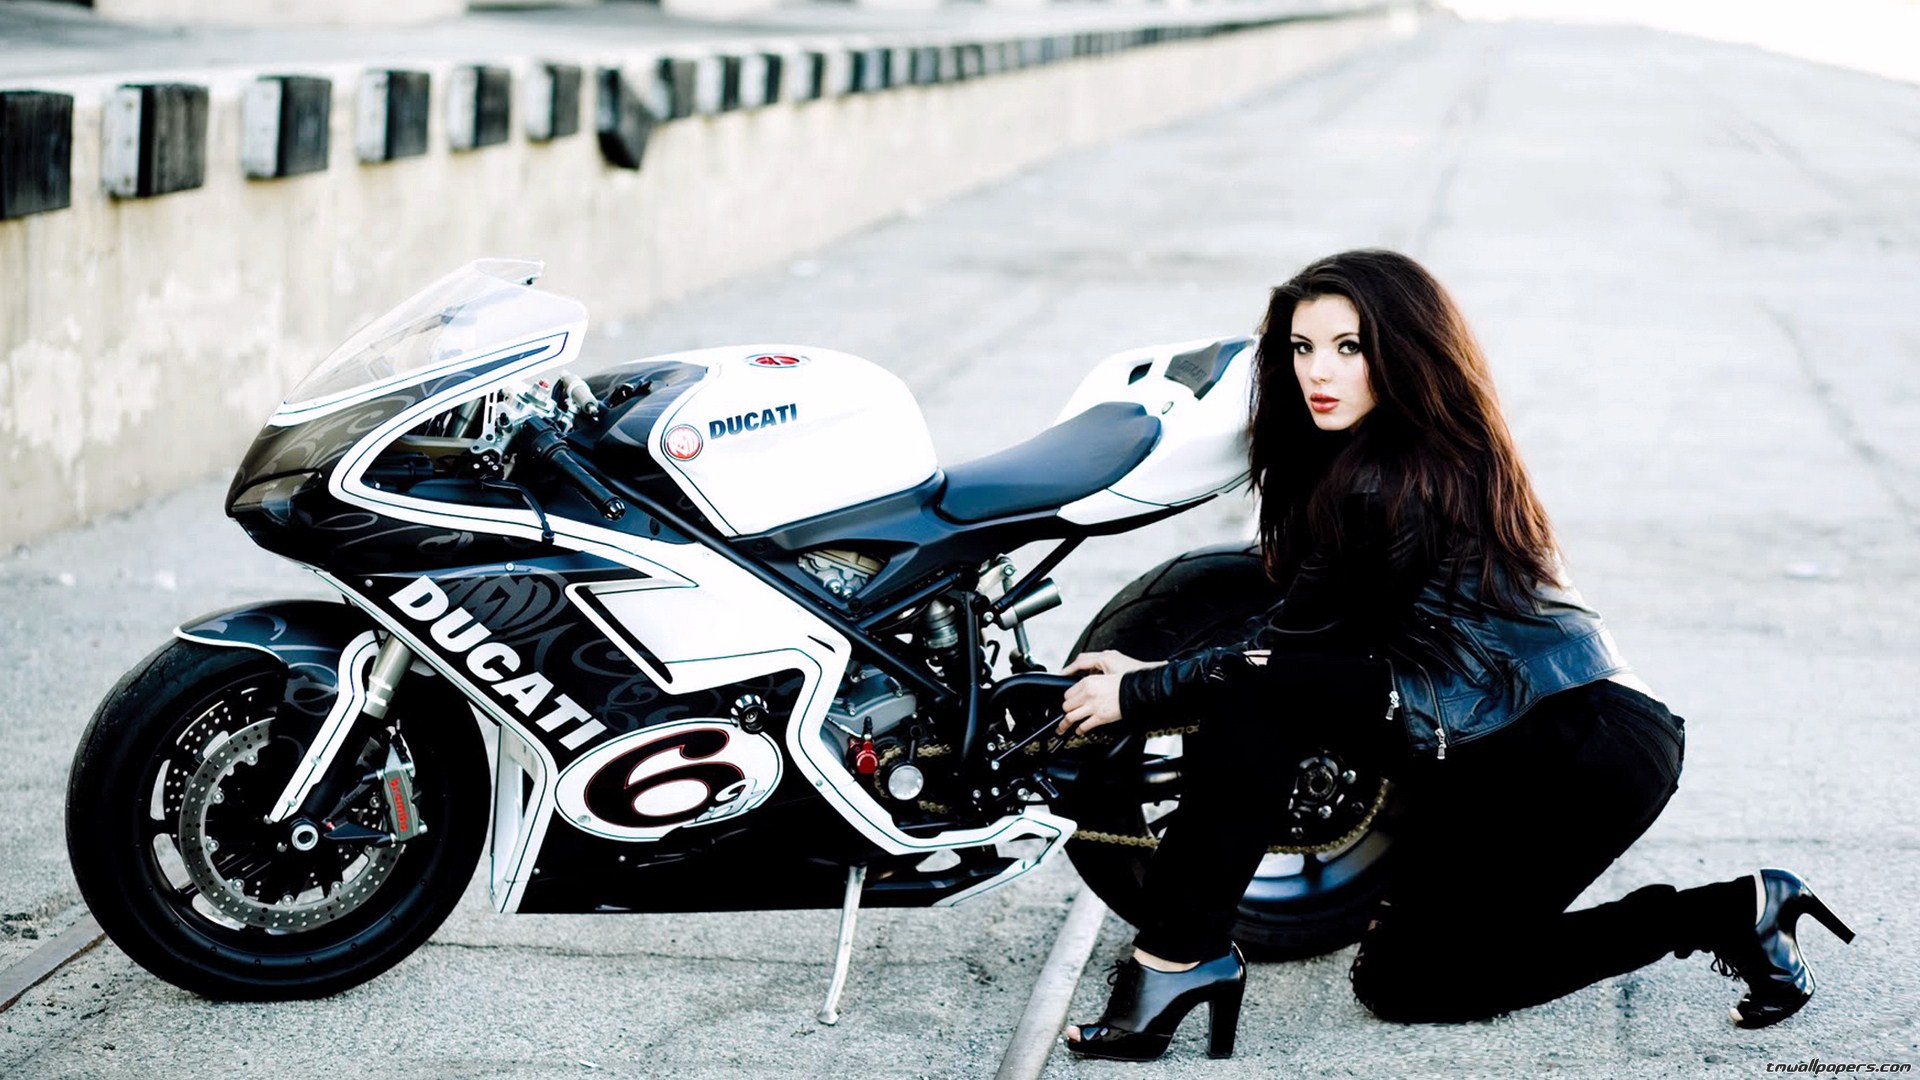 Motorcycle Girls Wallpaper Funny Photos Pictures Image